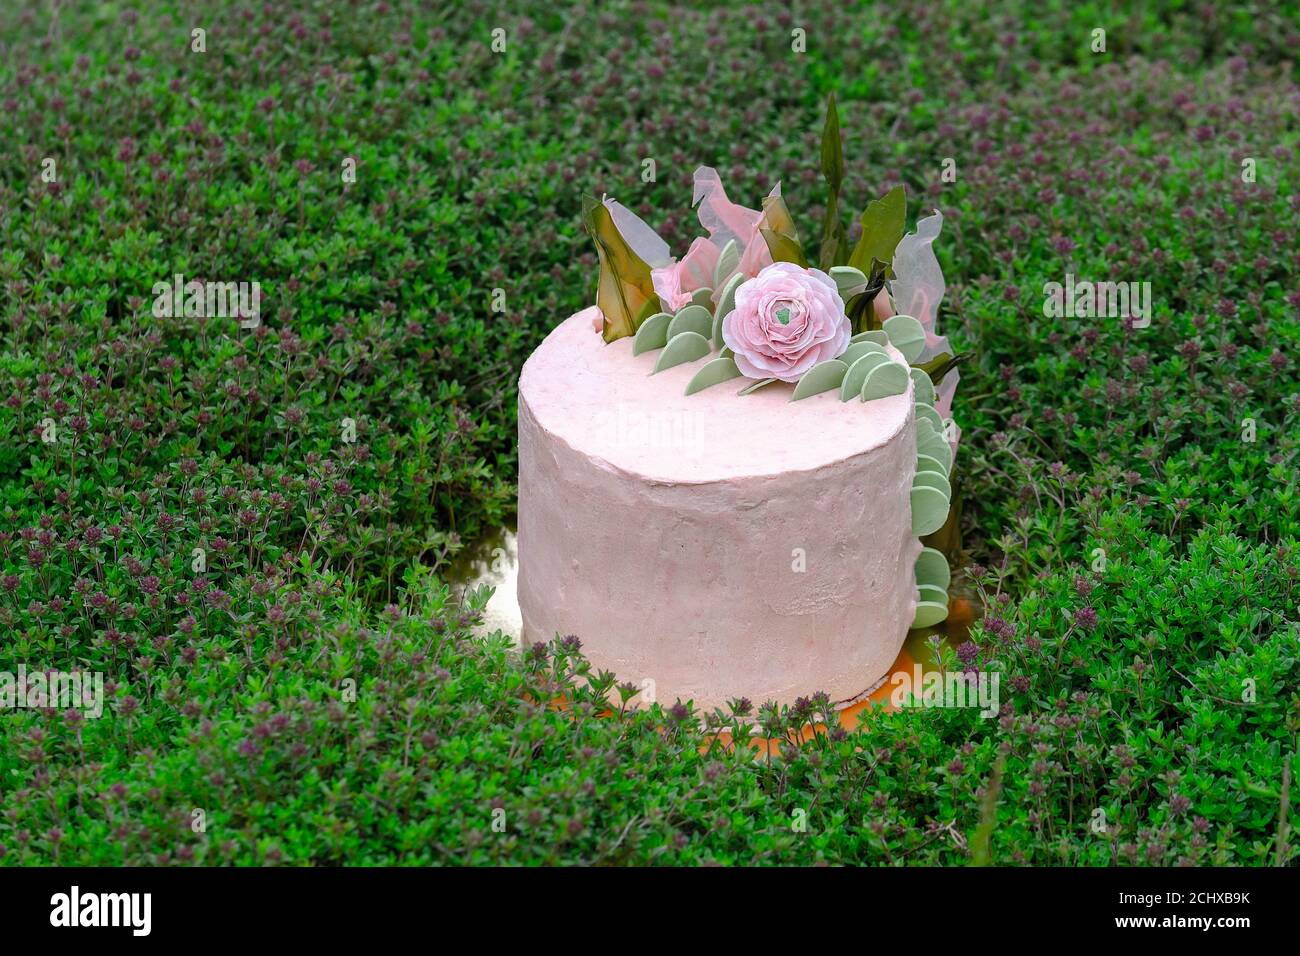 A very tasty healthy wonderful vegan tart without animal fat, covered with a rose-colored cream and decorated with a pink rose and green leaves. Stock Photo